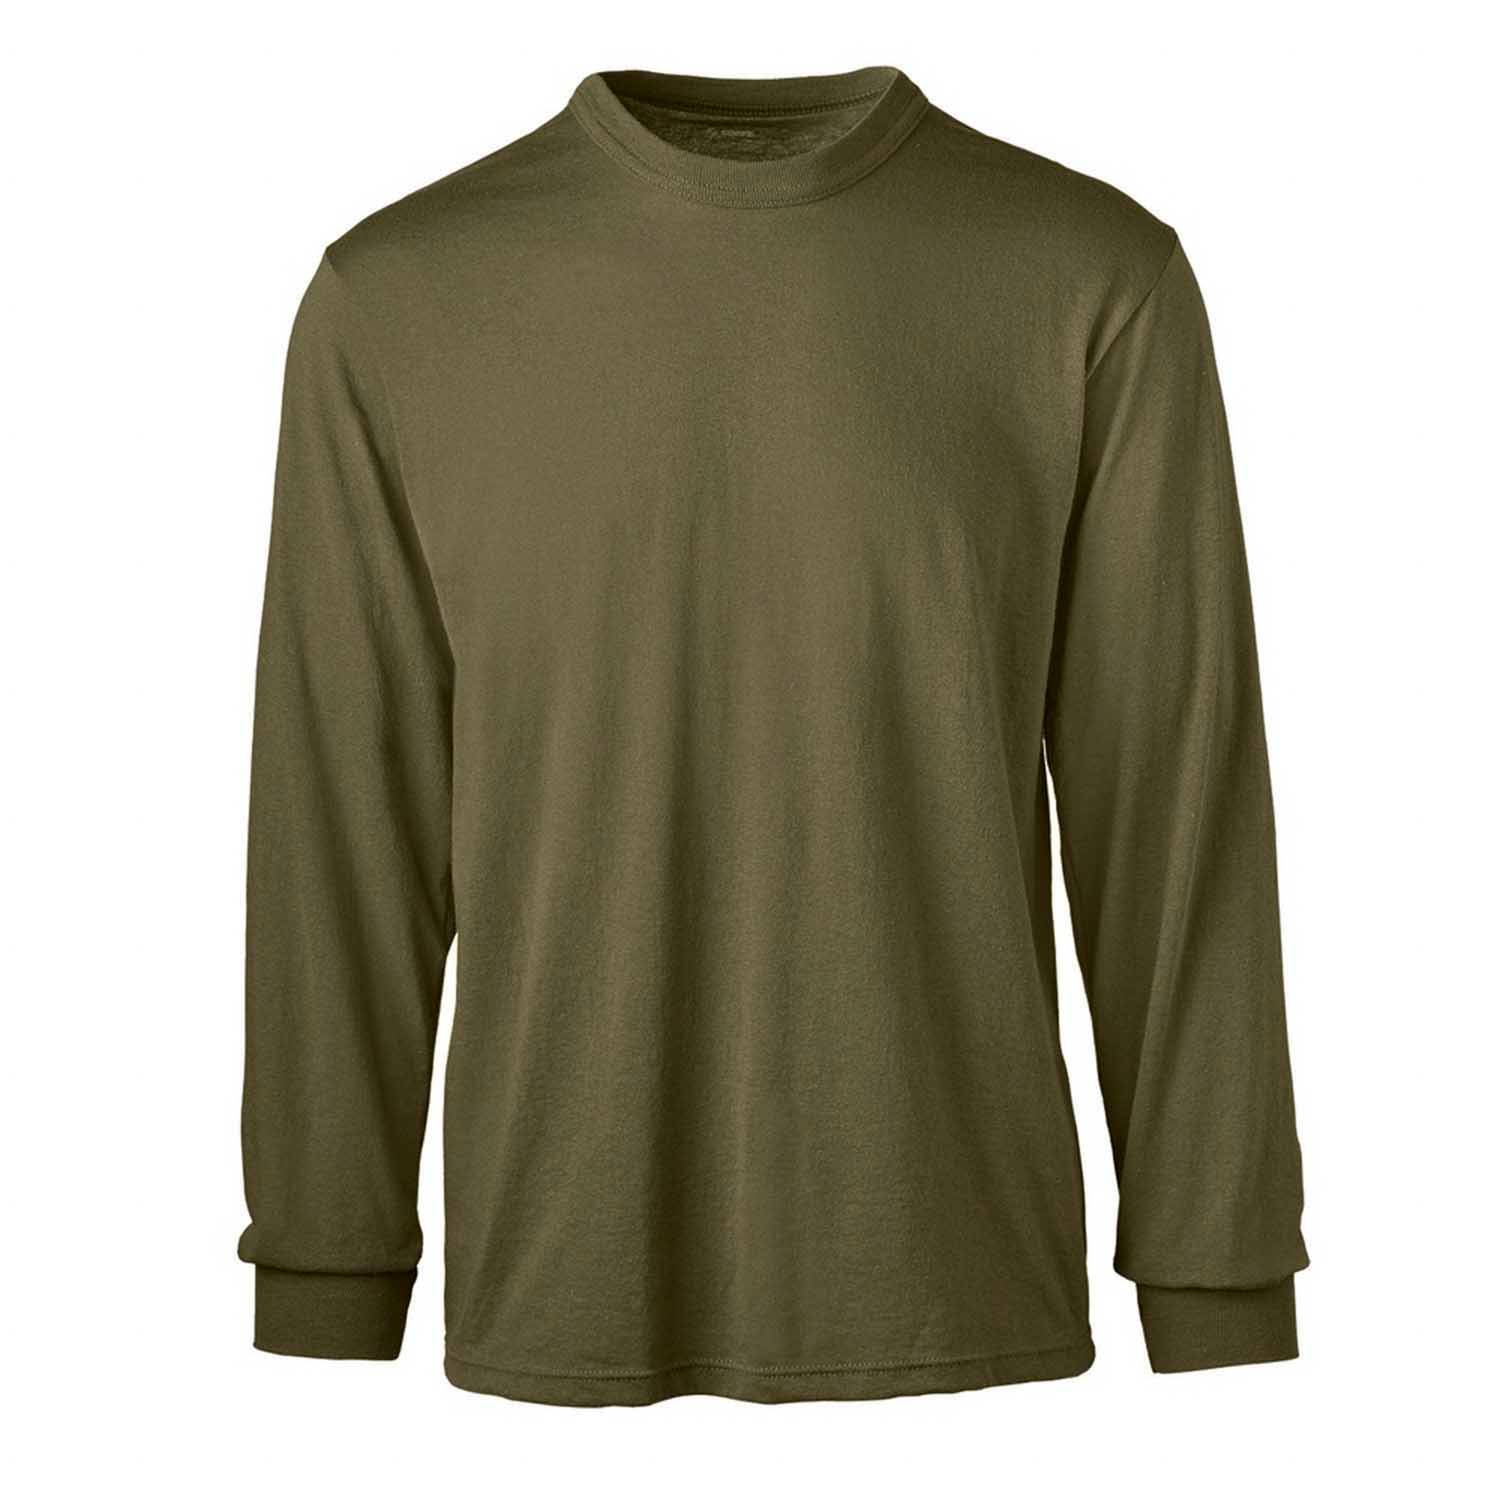 SOFFE 50/50 POLY/COTTON LONG SLEEVE T-SHIRT